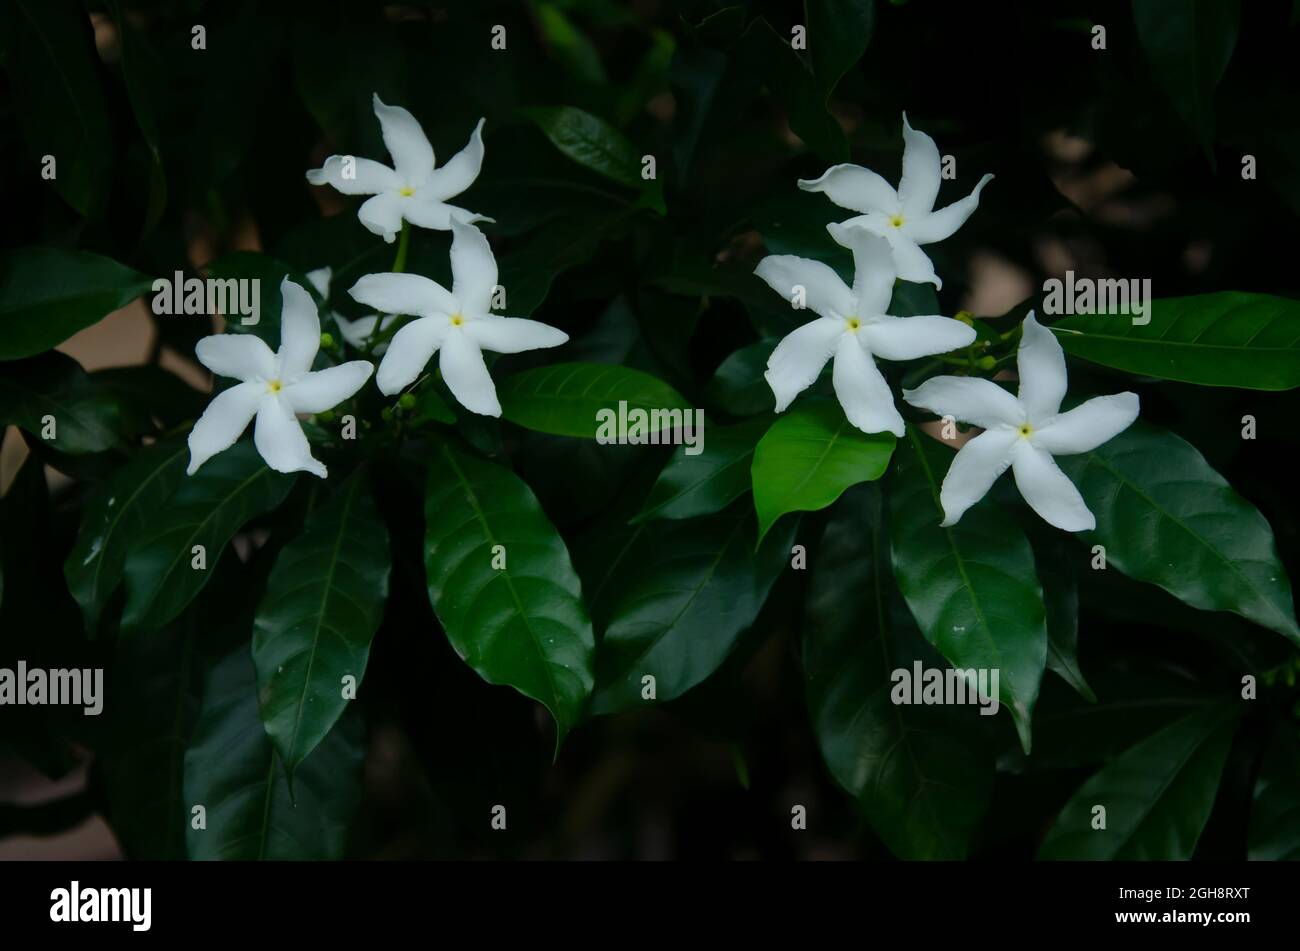 White crepe jasmine flower with green leaves in the garden in landscape. Stock Photo